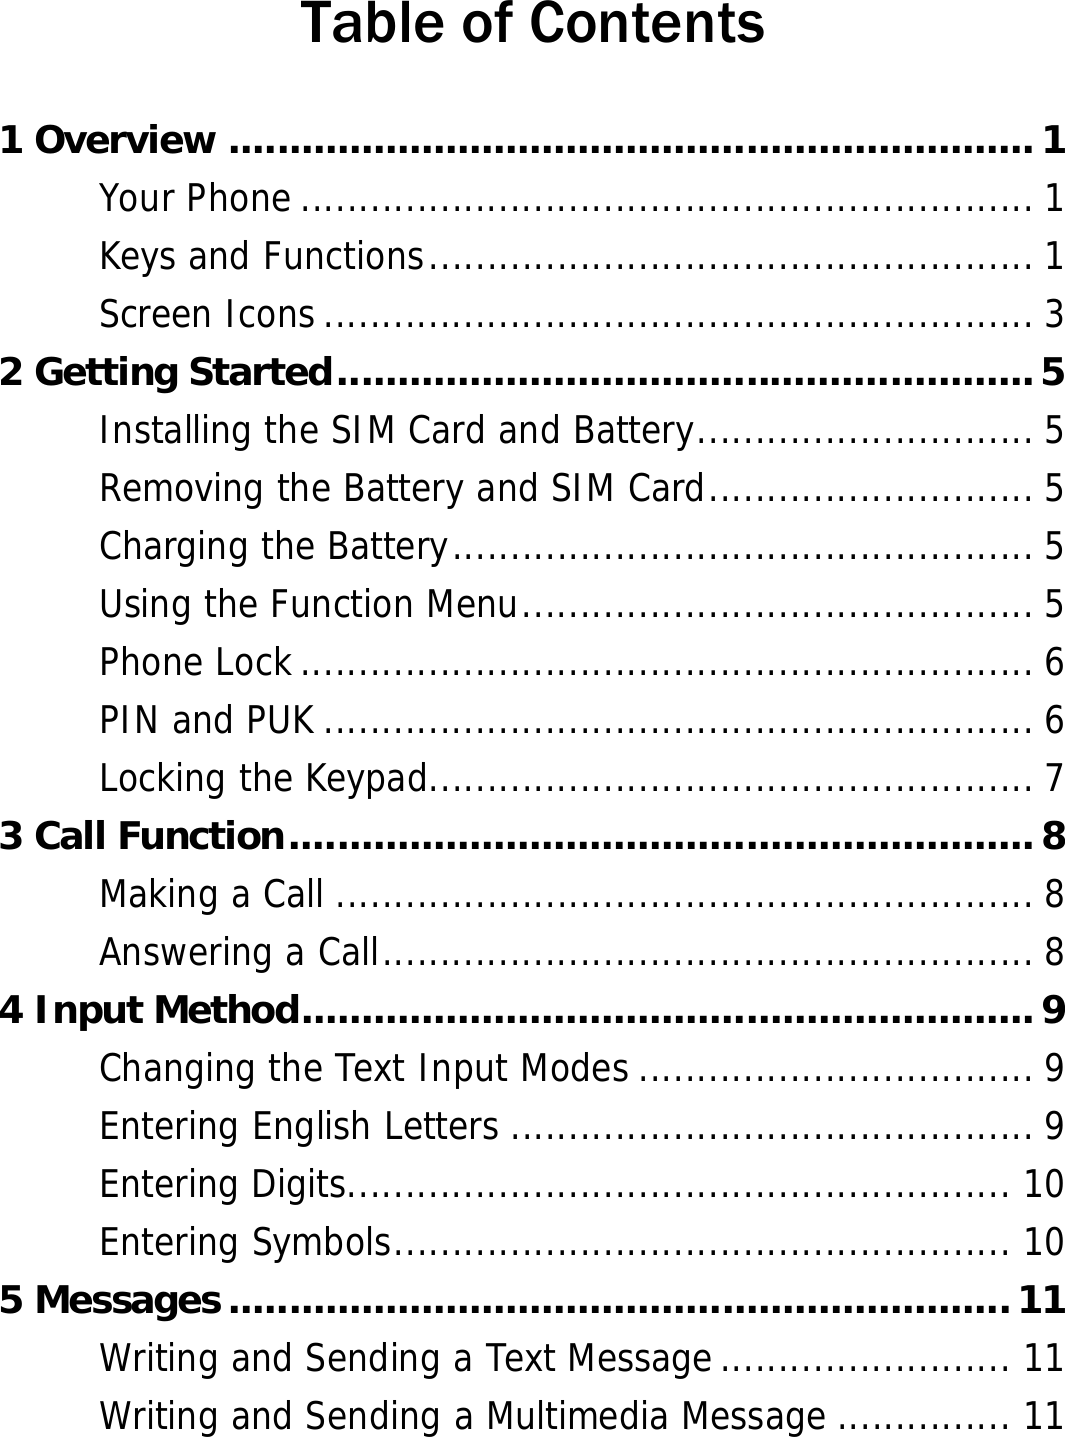  Table of Contents 1 Overview ...................................................................1 Your Phone ............................................................... 1 Keys and Functions.................................................... 1 Screen Icons............................................................. 3 2 Getting Started..........................................................5 Installing the SIM Card and Battery............................. 5 Removing the Battery and SIM Card............................ 5 Charging the Battery.................................................. 5 Using the Function Menu............................................ 5 Phone Lock ............................................................... 6 PIN and PUK ............................................................. 6 Locking the Keypad.................................................... 7 3 Call Function..............................................................8 Making a Call ............................................................ 8 Answering a Call........................................................ 8 4 Input Method.............................................................9 Changing the Text Input Modes .................................. 9 Entering English Letters ............................................. 9 Entering Digits......................................................... 10 Entering Symbols..................................................... 10 5 Messages .................................................................11 Writing and Sending a Text Message......................... 11 Writing and Sending a Multimedia Message ............... 11 